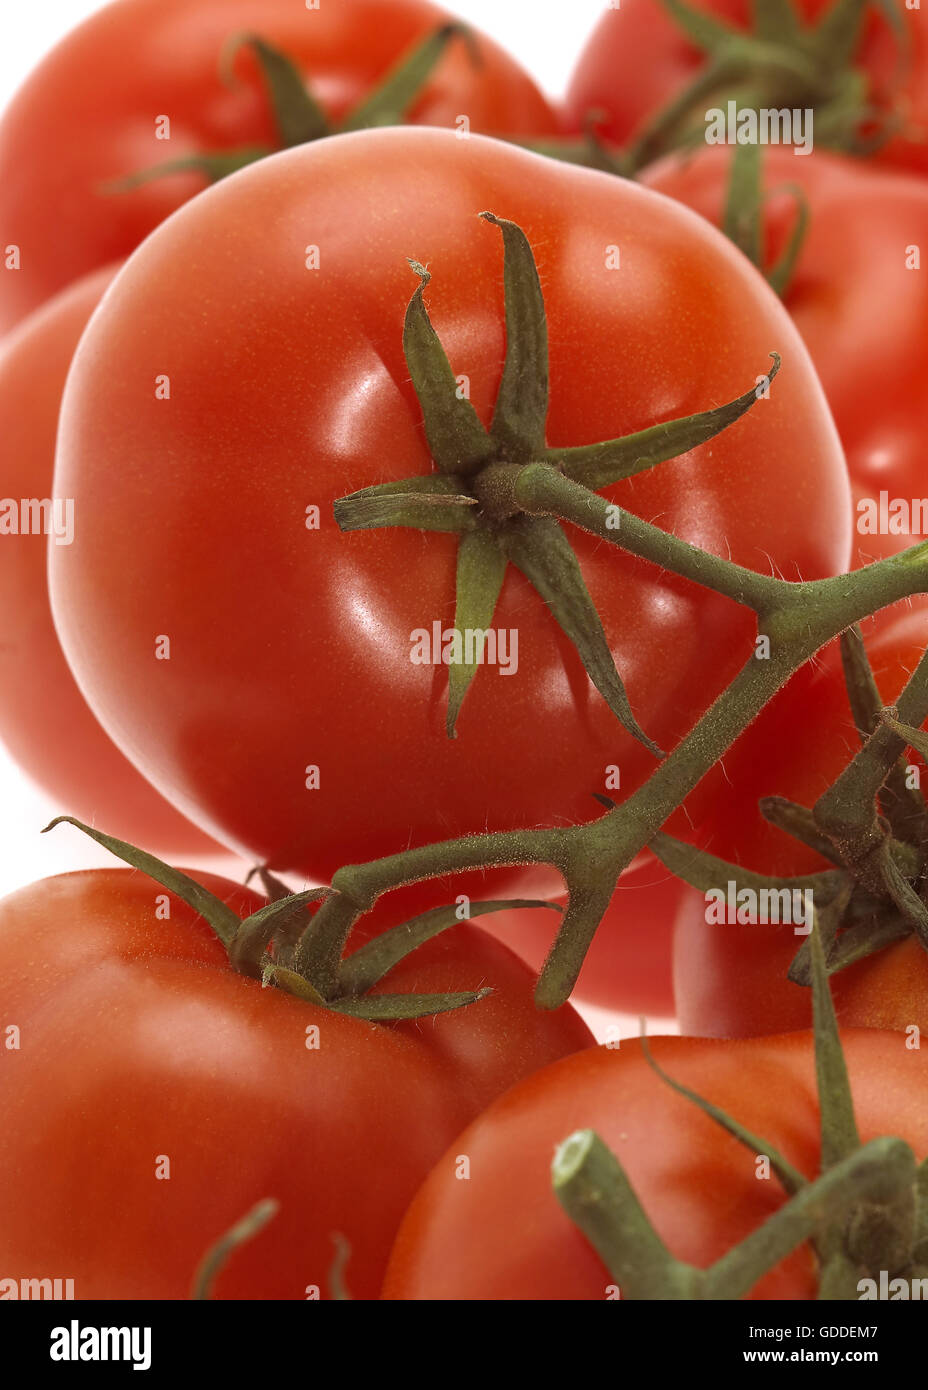 RED TOMATO CLUSTER Stock Photo